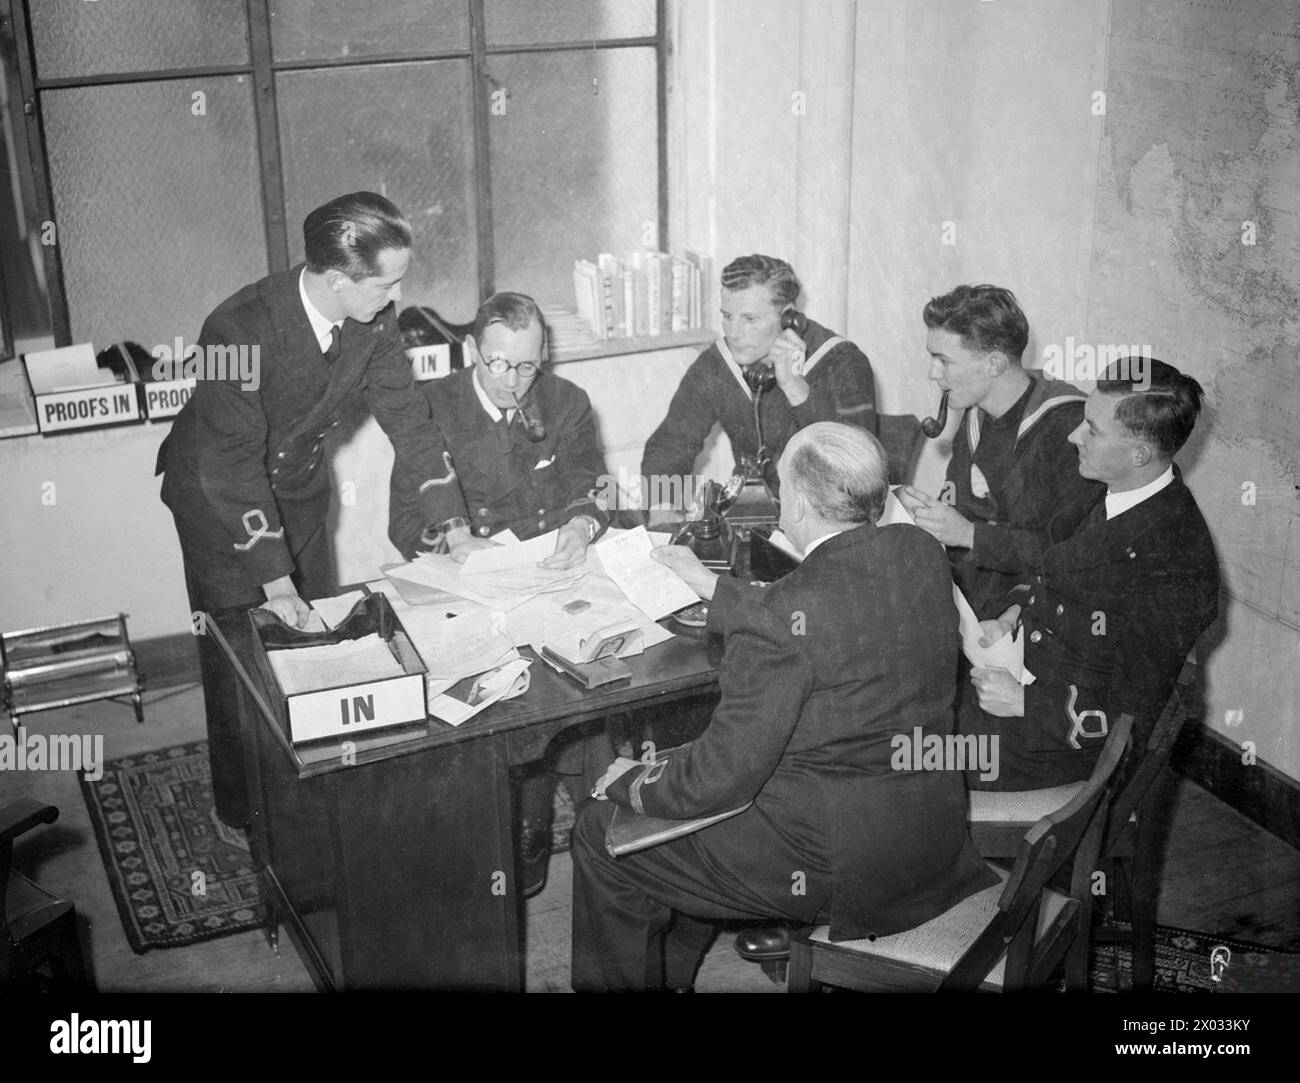 BRITISH PACIFIC FLEET'S NEWSPAPER. AUGUST 1945, SYDNEY, AUSTRALIA. PRODUCTION AND DISTRIBUTION OF THE BRITISH PACIFIC FLEET'S OWN NEWSPAPER, 'PACIFIC POST', BY THE NAVY, FOR THE NAVY. - The editorial conference held each morning to discuss policy and layout. Left to right: Sub Lieut E P Glover, RNVR, of Blackburn, Lancs, Sports Editor; Lieut John Willis, RNVR, of Snaresbrook, Essex, Editor and former Fleet Street journalist; Signalman R Hatchett of London; O/S F W Guy of Spalding; Sub Lieut D J Newton, RNVR; and Lieut A H Bowley, RNVR Stock Photo